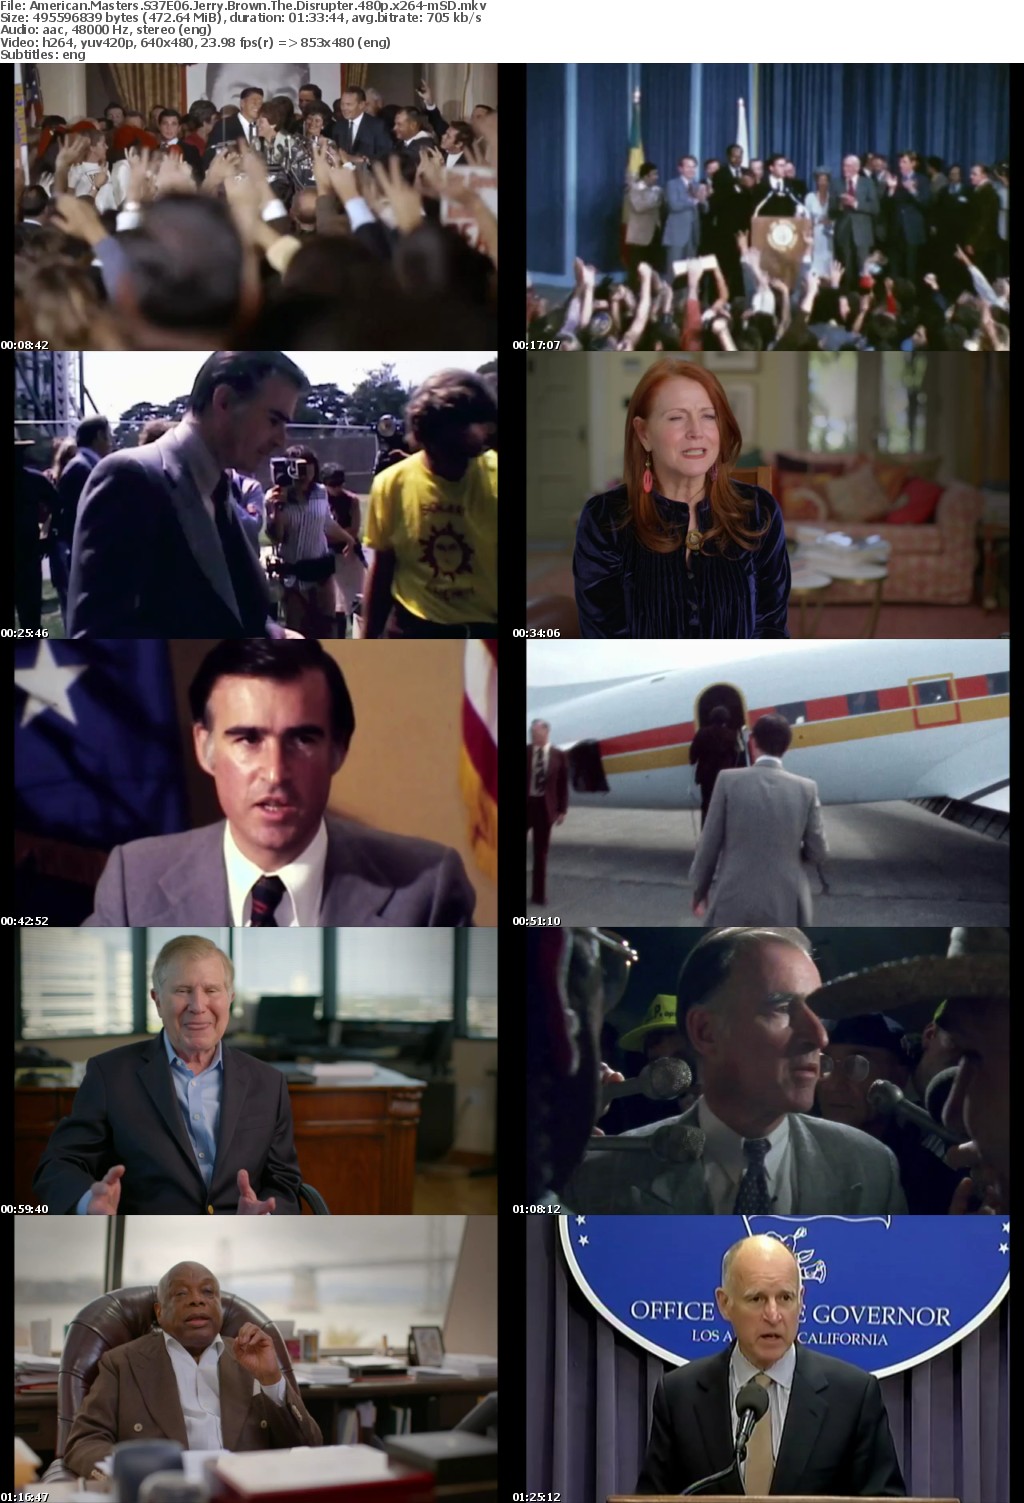 American Masters S37E06 Jerry Brown The Disrupter 480p x264-mSD